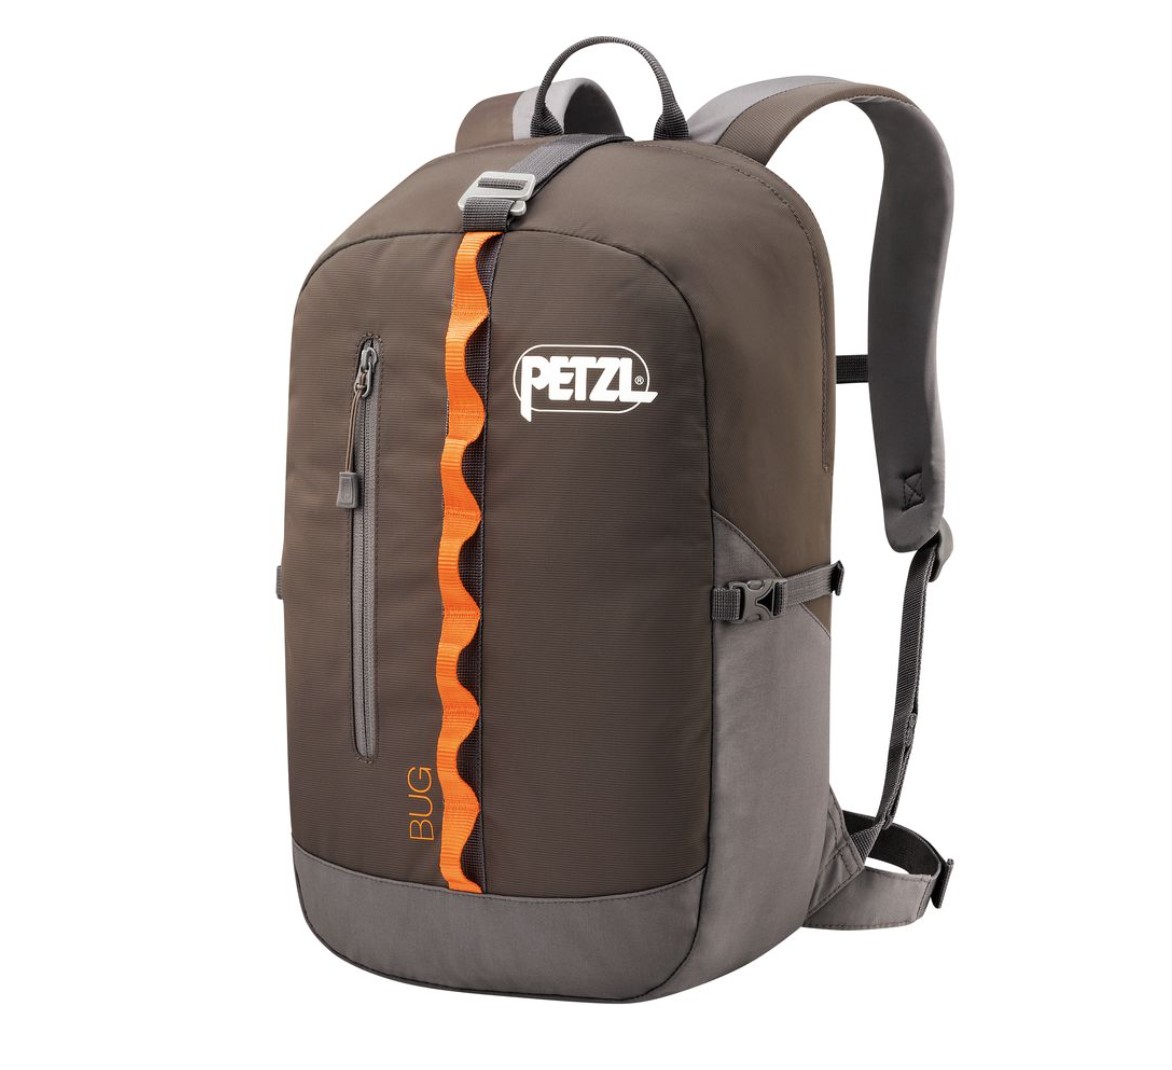 Petzl Bug Review | Tested & Rated